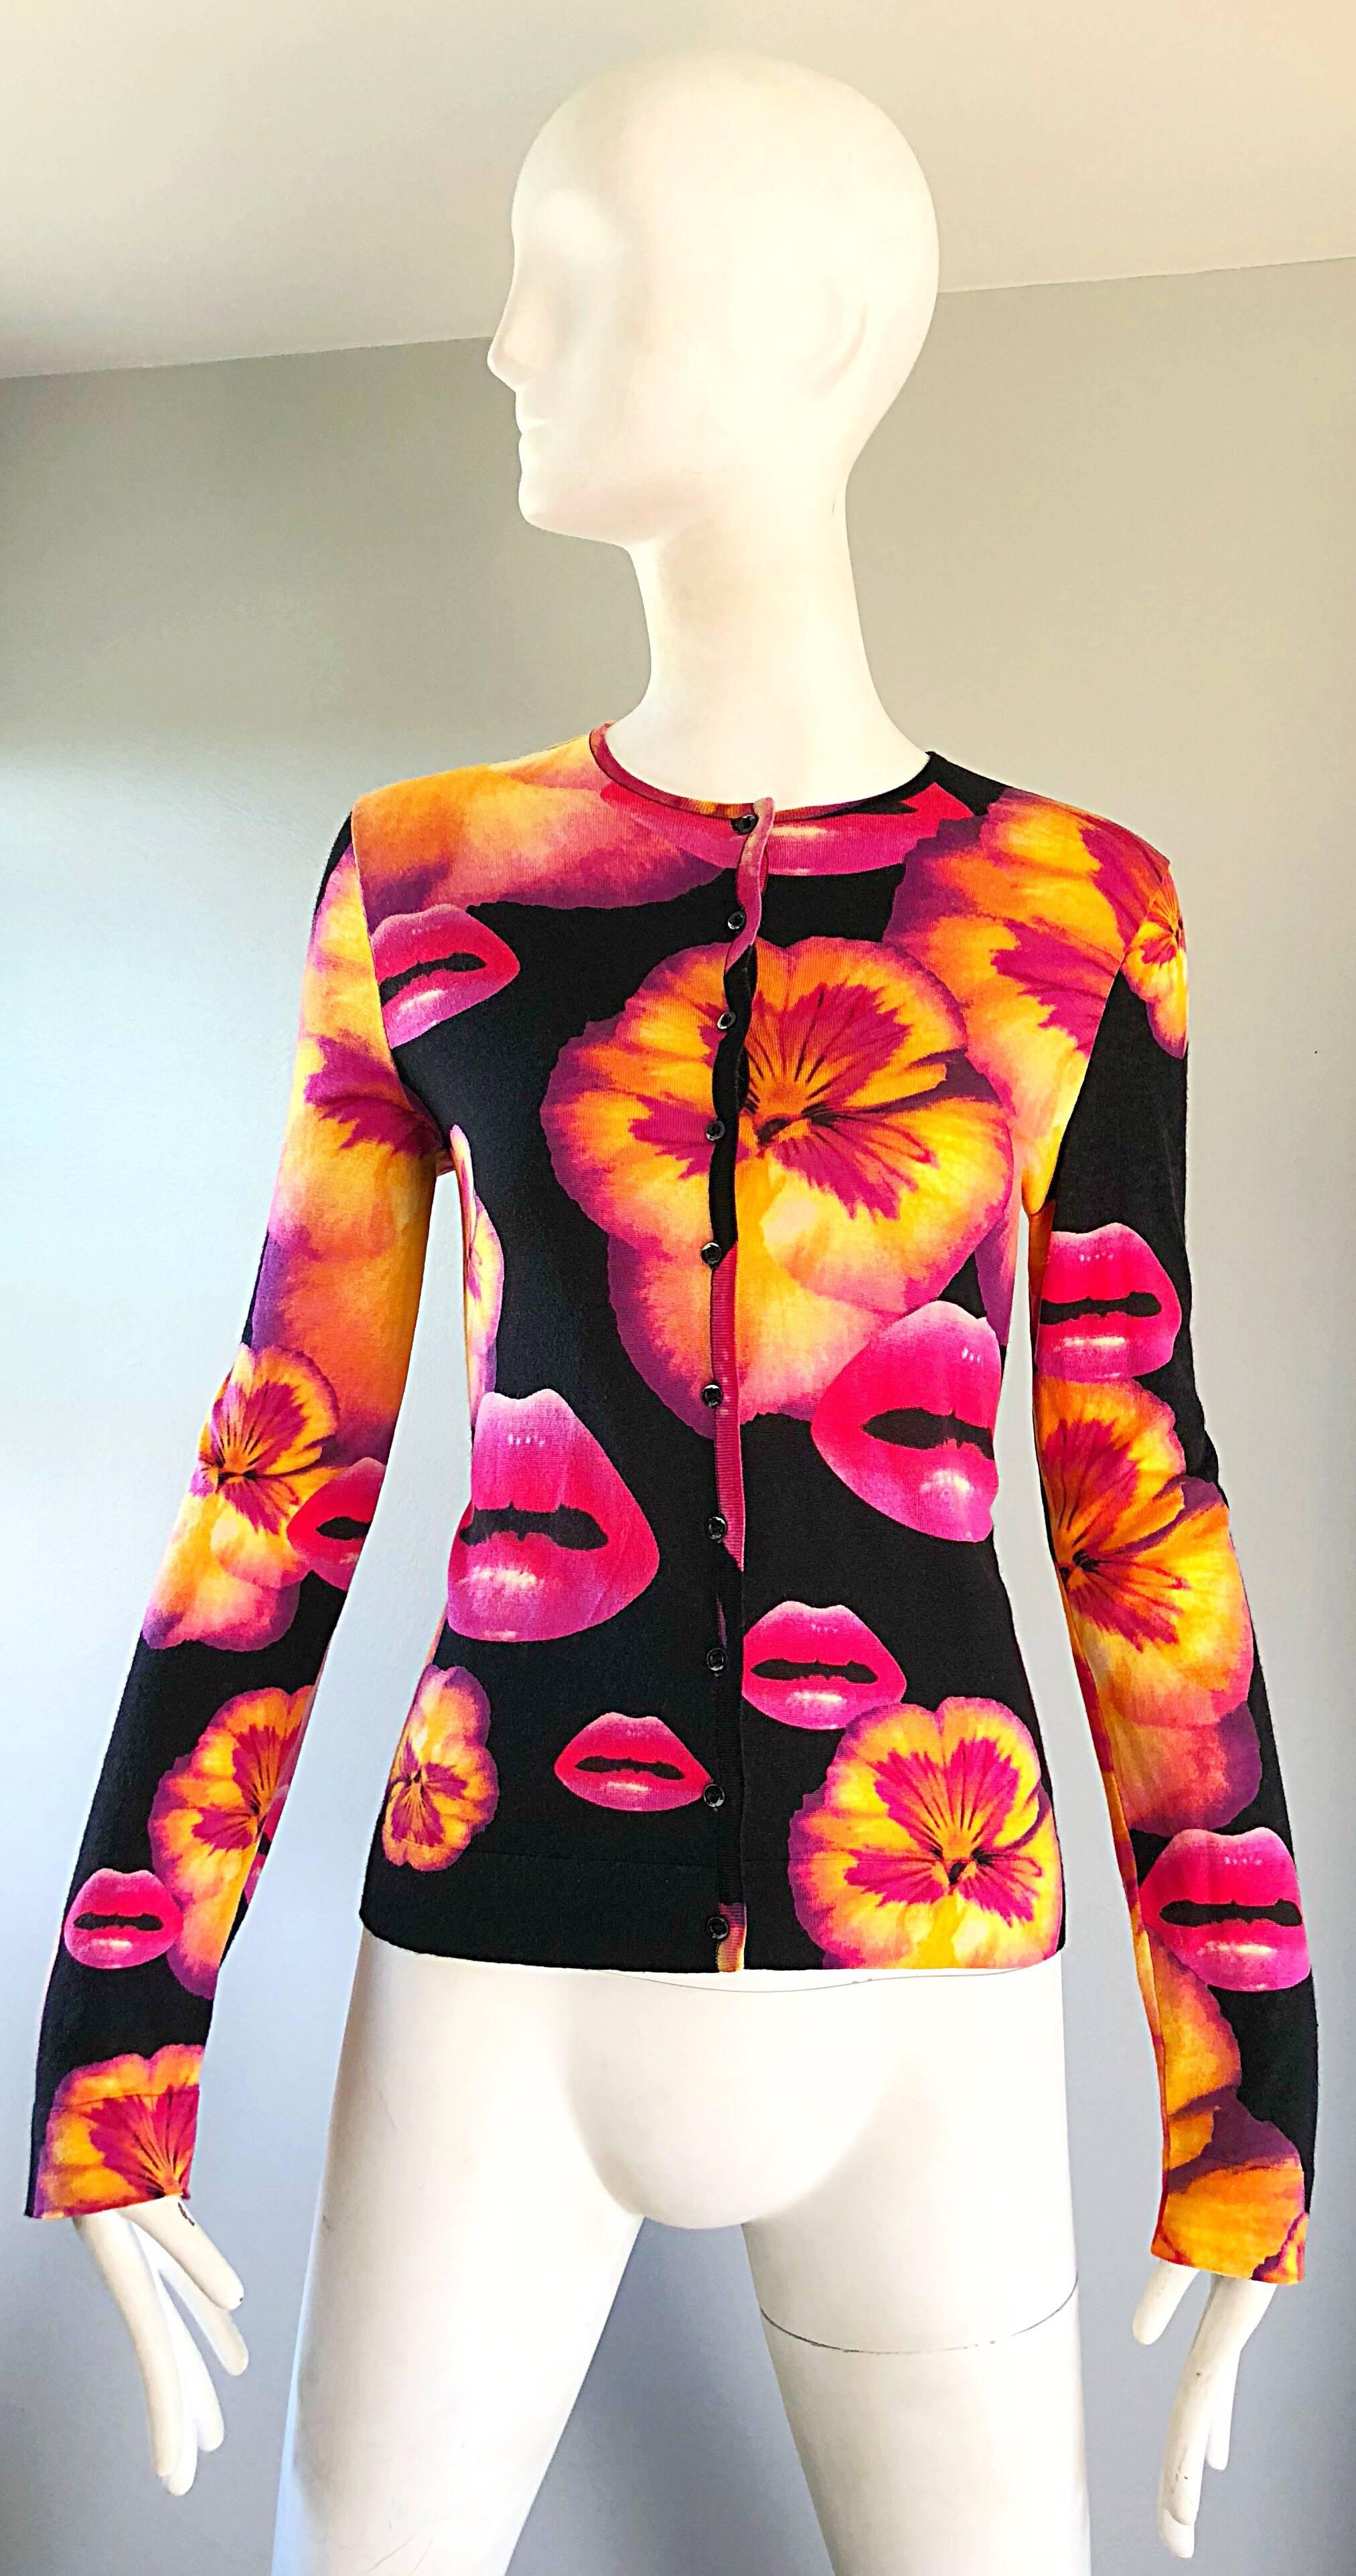 Rare, and absolutely amazing CHRISTIAN DIOR by JOHN GALLIANO lip and pansy flower print super soft cotton blend cardigan sweater! Features fantastic opulent graphics throughout. The perfect alternative to a basic clack cardigan. Luxurious